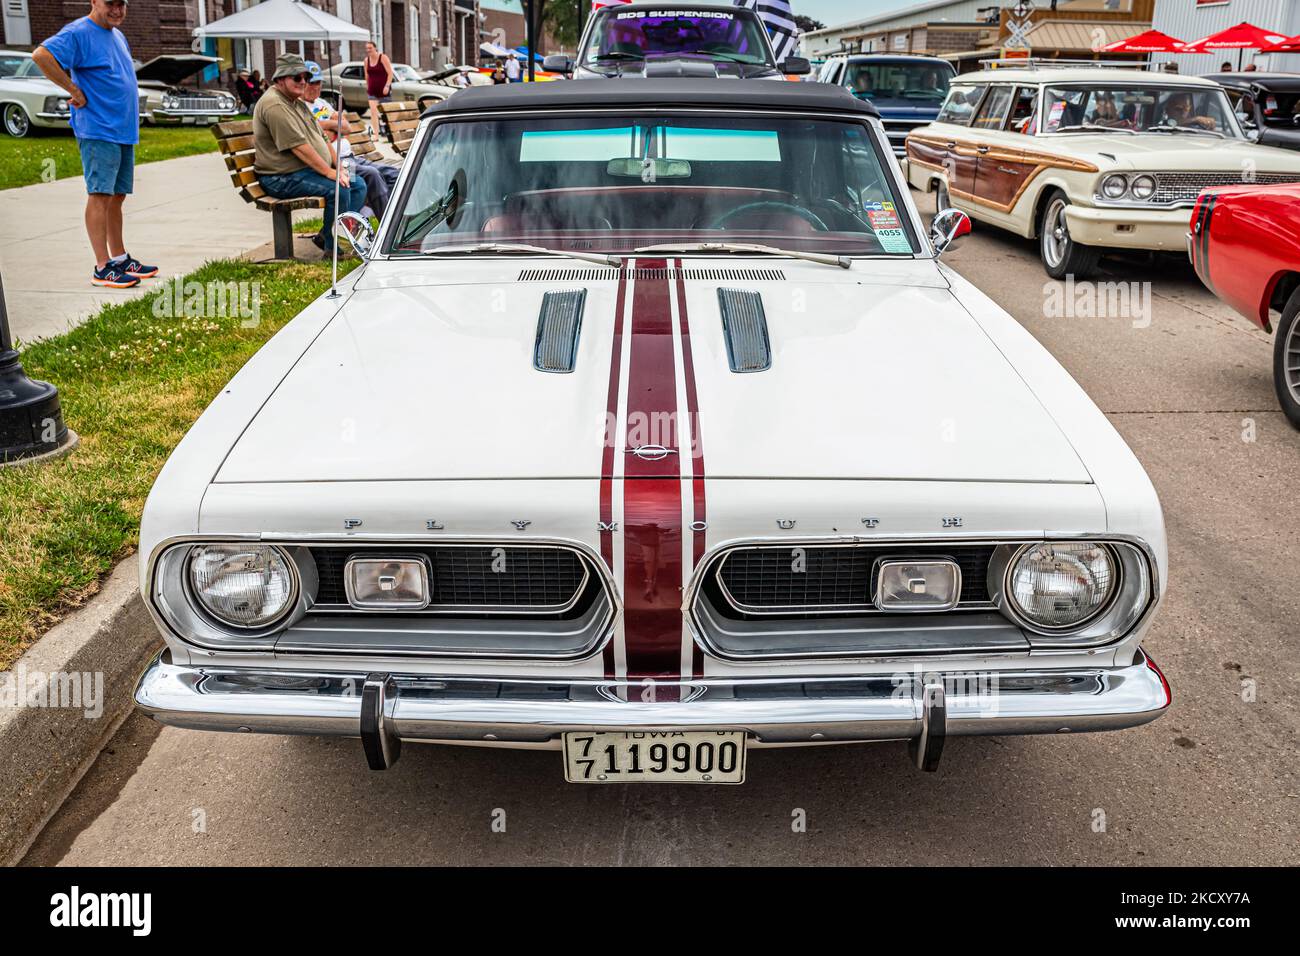 Des Moines, IA - July 01, 2022: High perspective front view of a 1967 Plymouth Barracuda Formula S Convertible at a local car show. Stock Photo